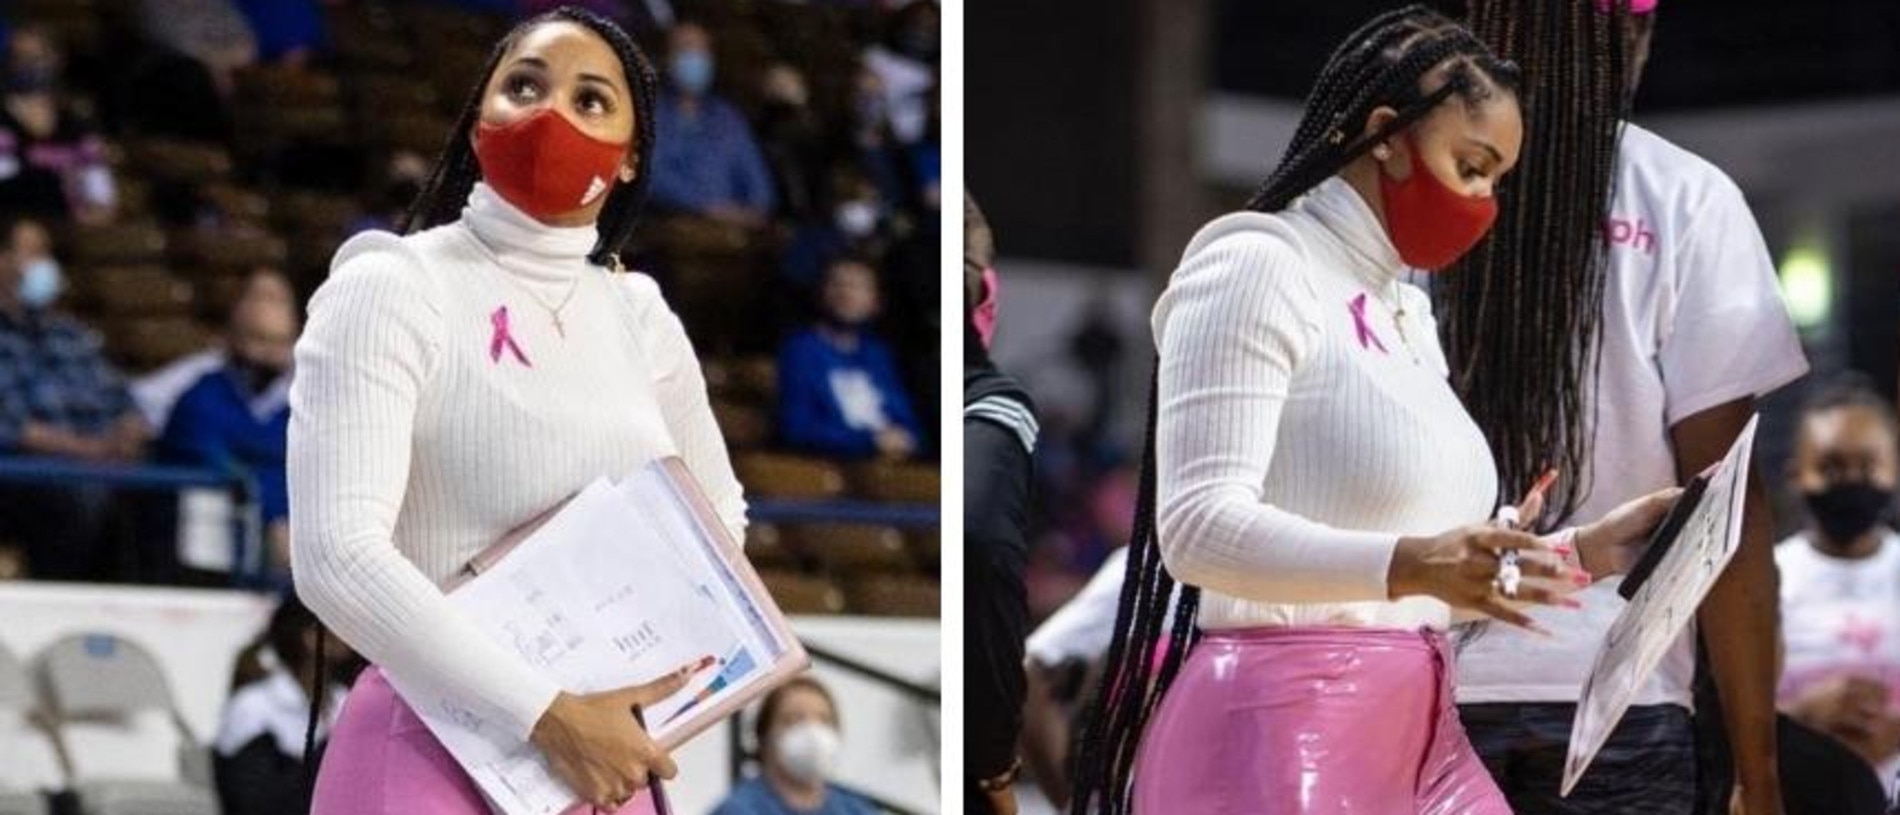 Basketball news 2022: Sydney Carter forced to defend outfit choice after  heated backlash